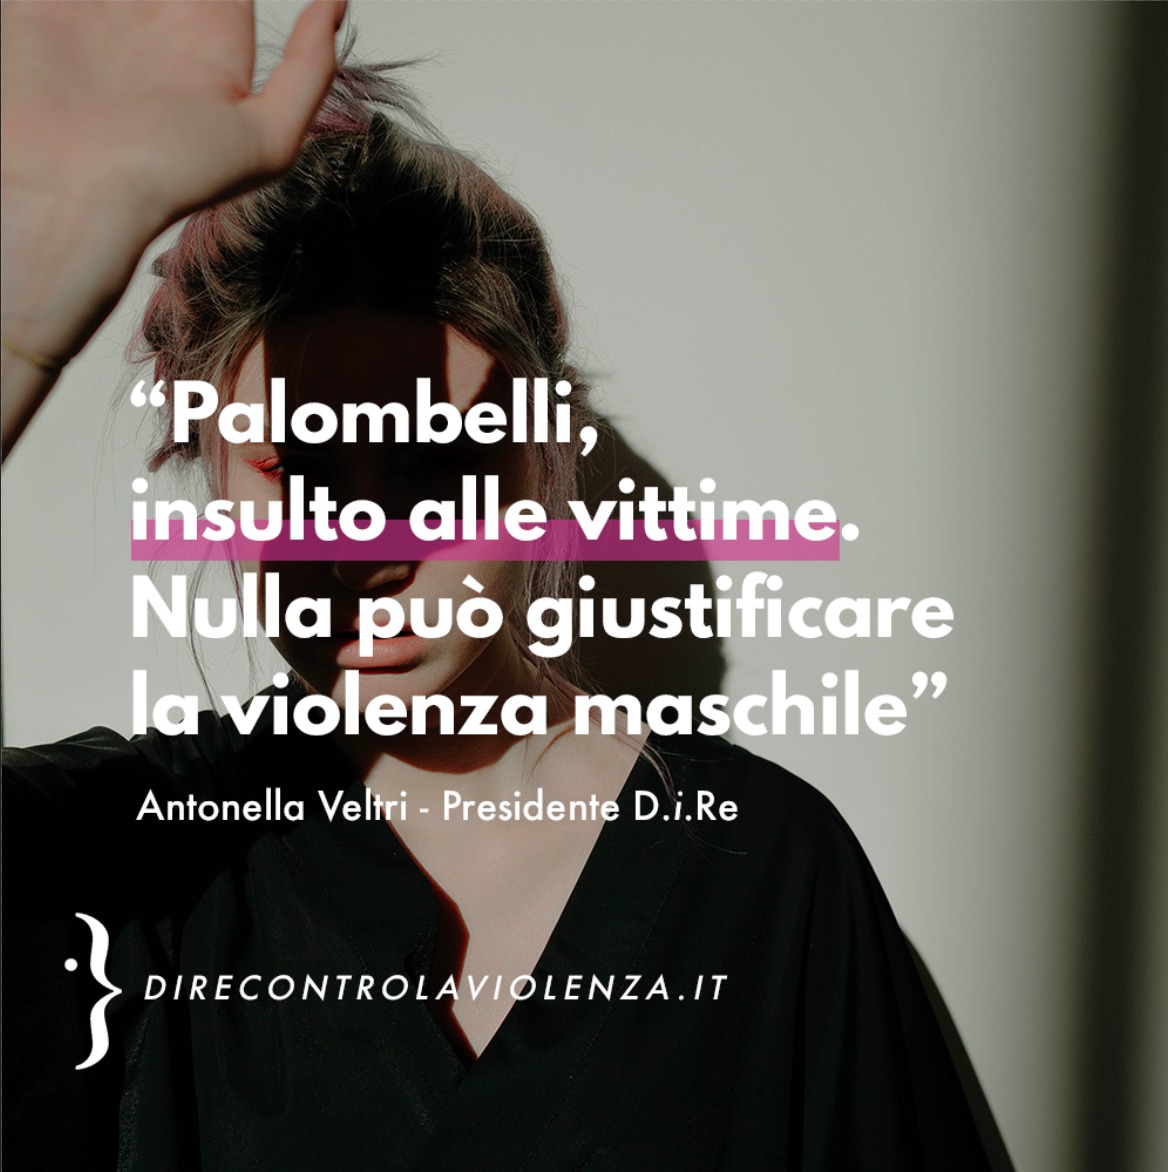 Veltri, president D.i.Re: "Palombelli, apologies are not enough. It is secondary victimization"